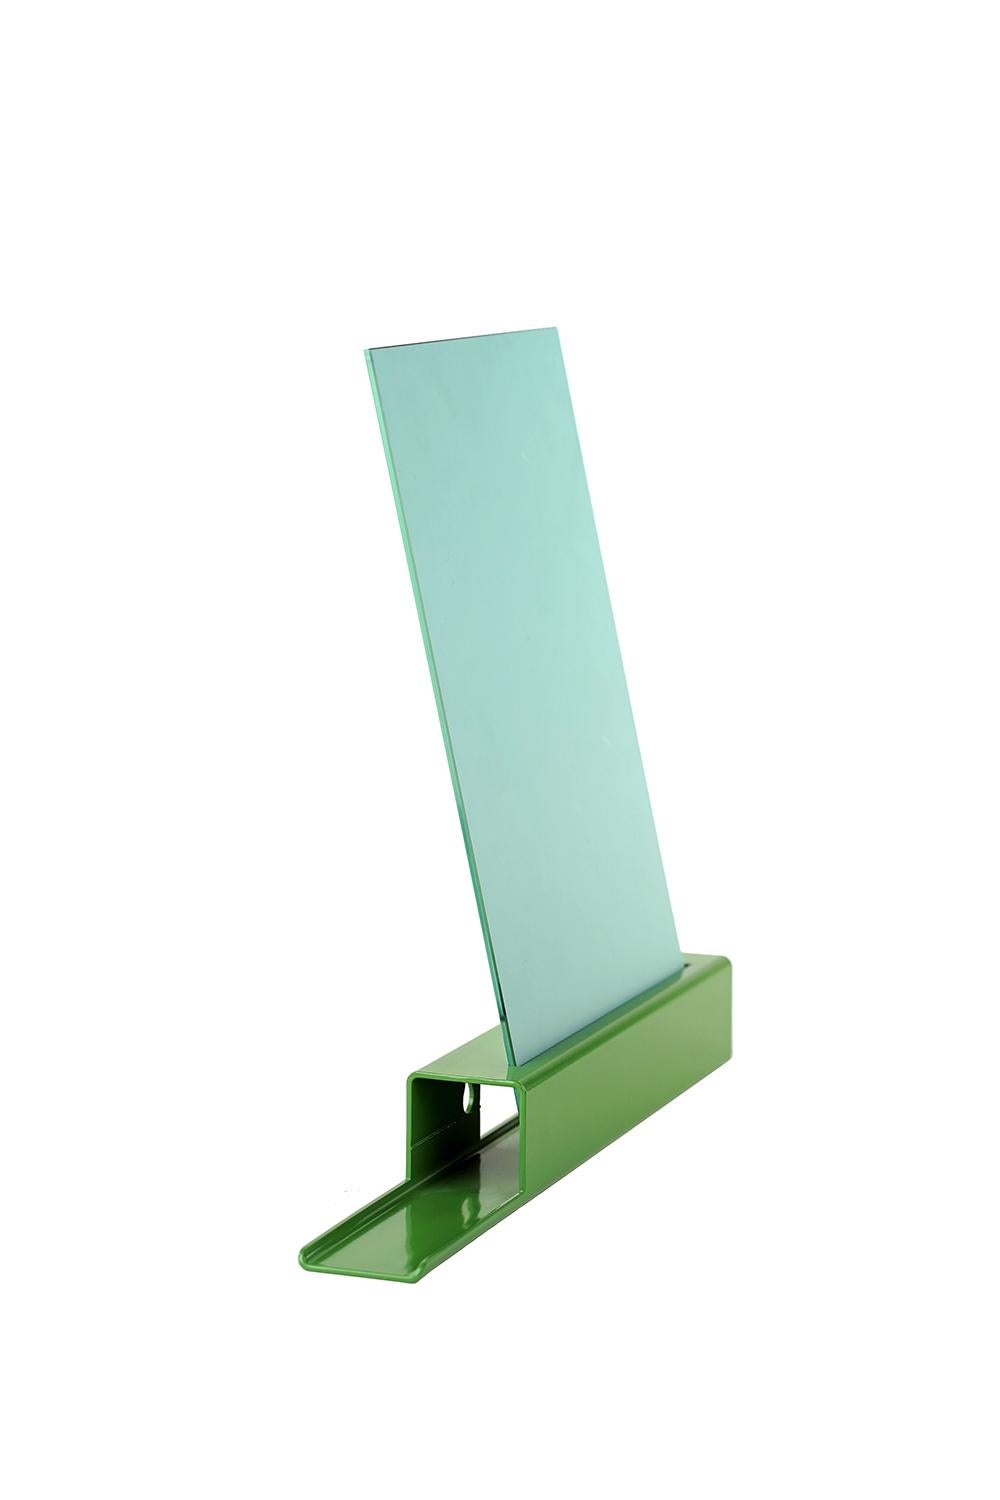 The M1 (Mirror 1) is a line of mirrors. This industrial yet elegant design is available in various versions, colours and sizes. Alone or in combination, you can make a statement out of functionality. Due to the timeless design incorporated in an